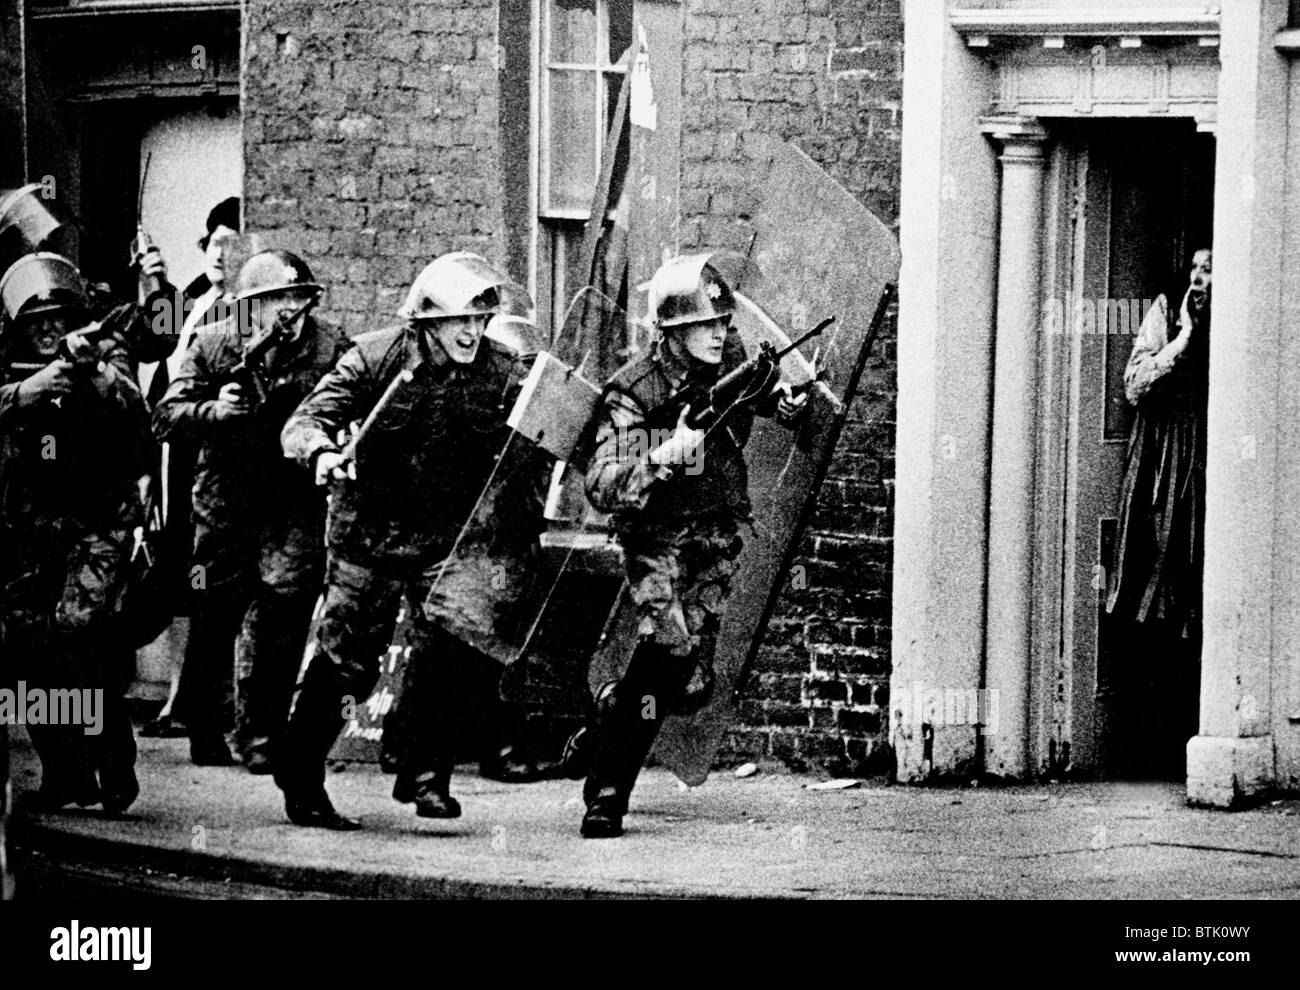 British soldiers chase a sniper down the street in Northern Ireland while a British housewife stands shocked in a doorway Stock Photo